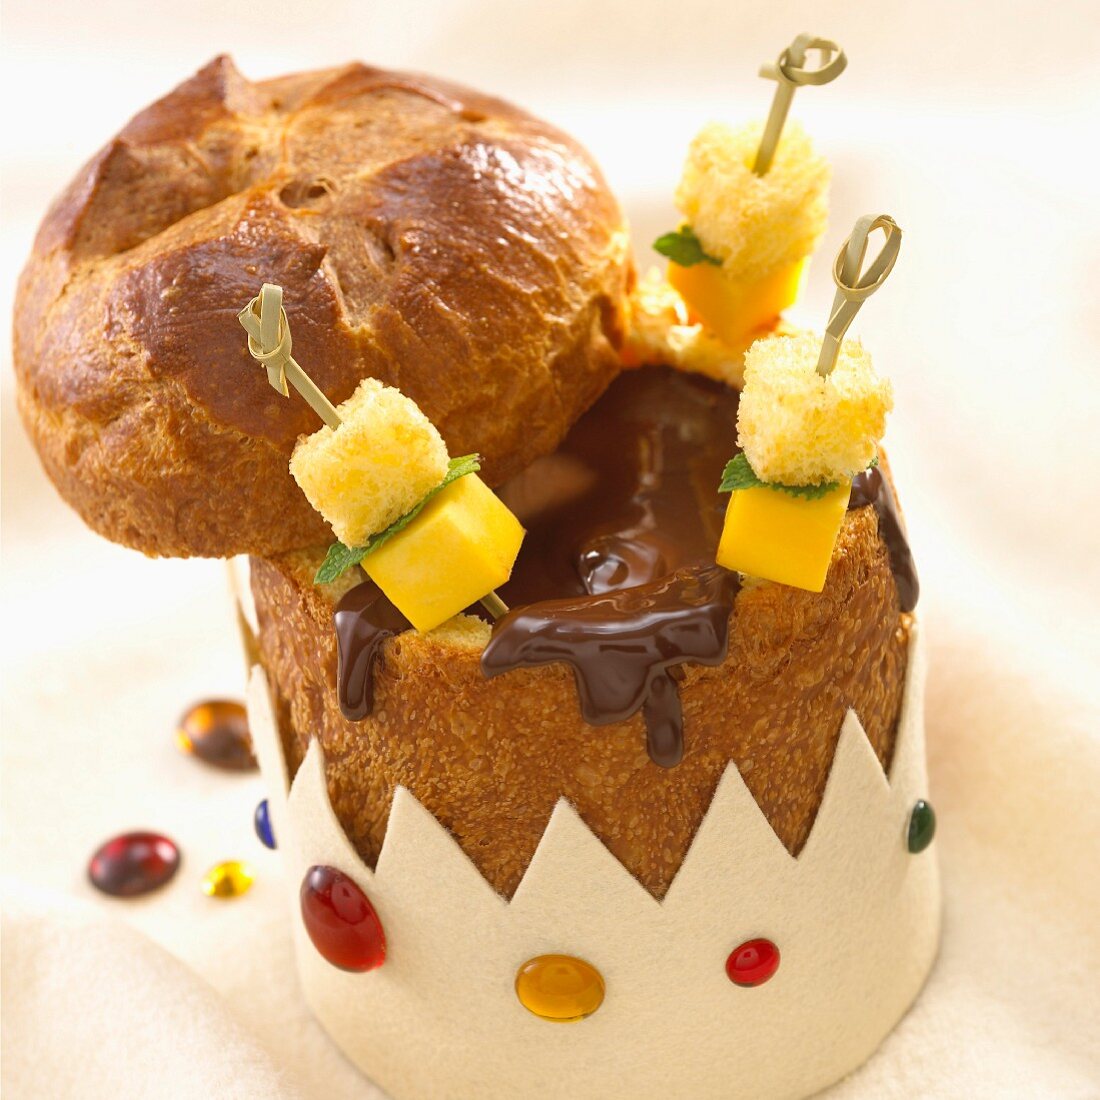 A brioche surprise filled with chocolate and mangoes